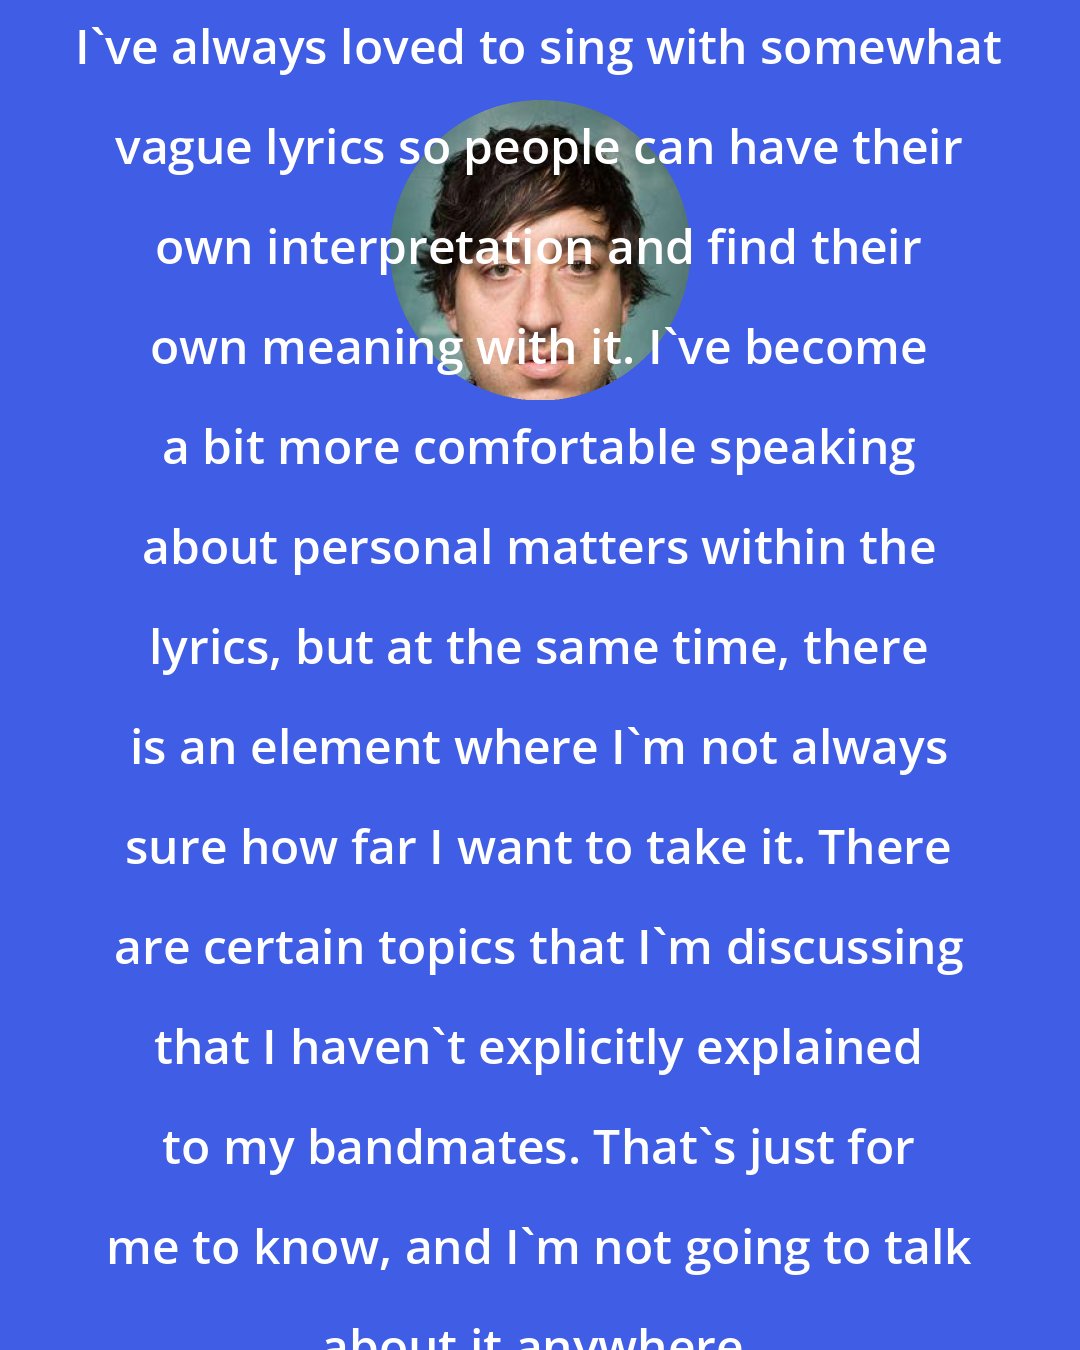 Ed Droste: I've always loved to sing with somewhat vague lyrics so people can have their own interpretation and find their own meaning with it. I've become a bit more comfortable speaking about personal matters within the lyrics, but at the same time, there is an element where I'm not always sure how far I want to take it. There are certain topics that I'm discussing that I haven't explicitly explained to my bandmates. That's just for me to know, and I'm not going to talk about it anywhere.